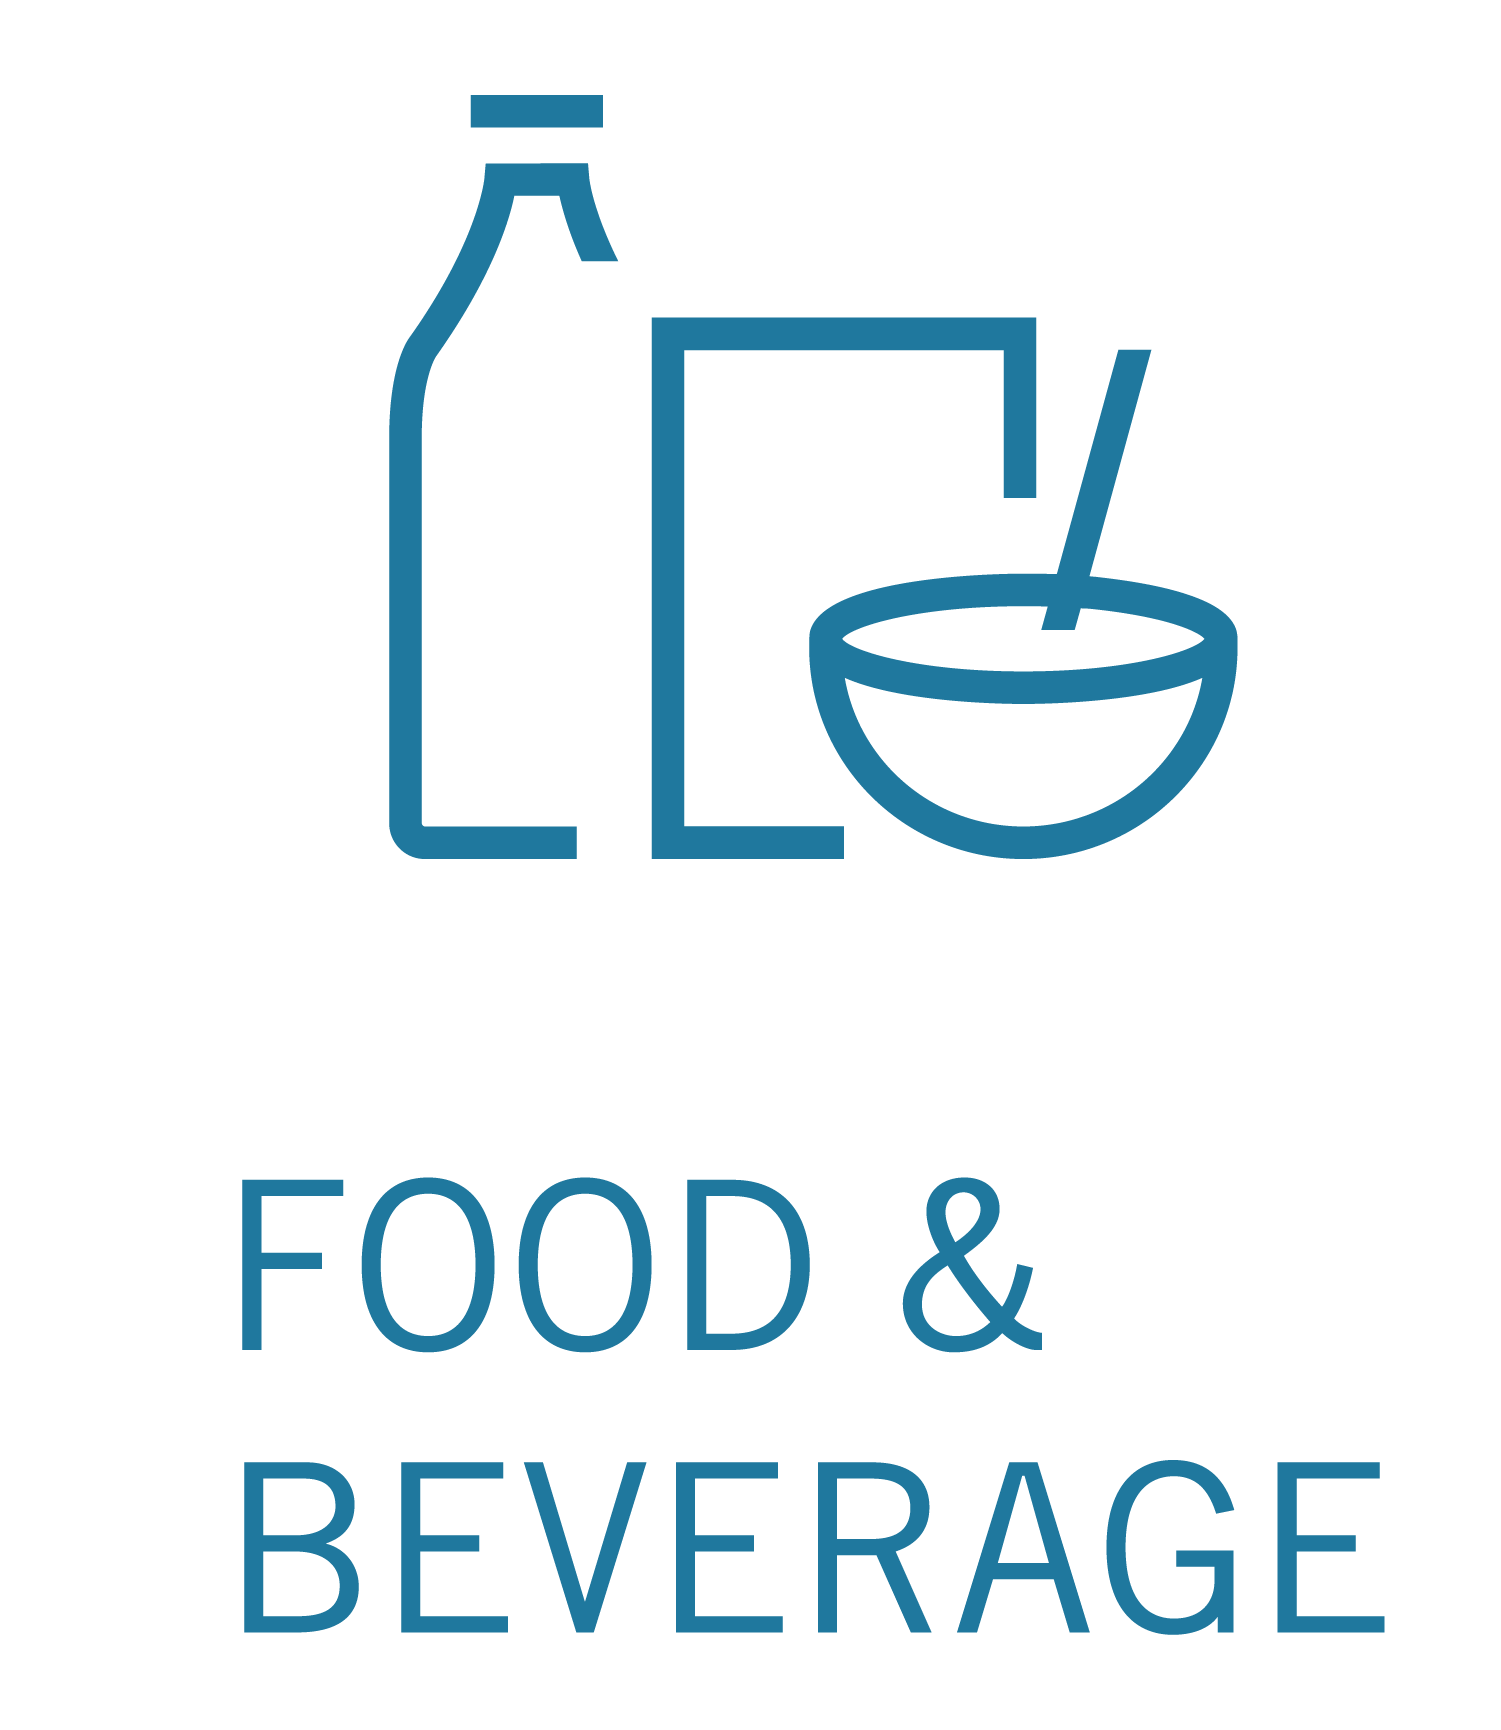 Food and Beverage Logo - Used Food & Beverage Equipment & Machinery | Federal Equipment